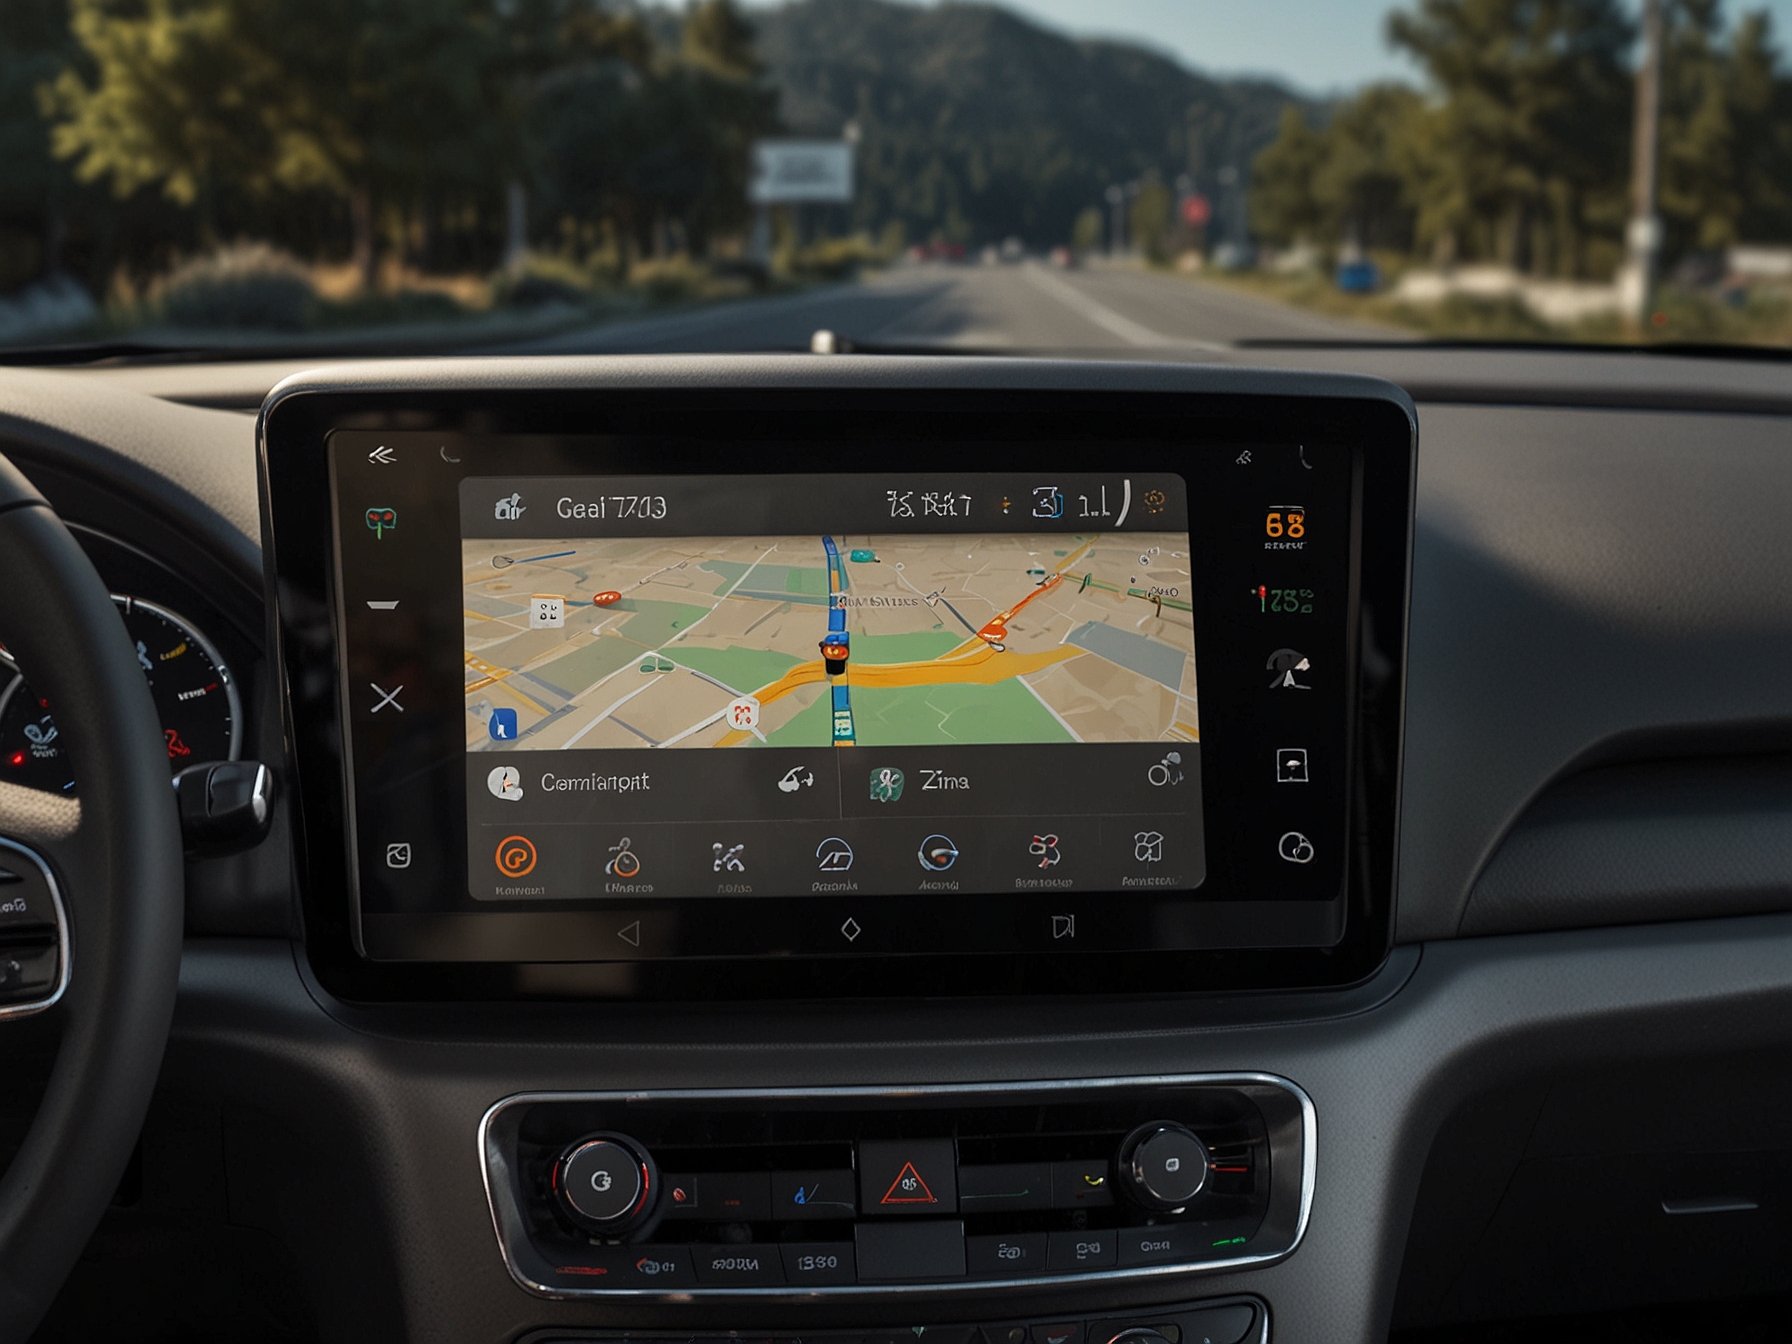 A car dashboard display showing the redesigned Google Assistant interface in Android Automotive, highlighting larger fonts and rearranged elements for better readability.